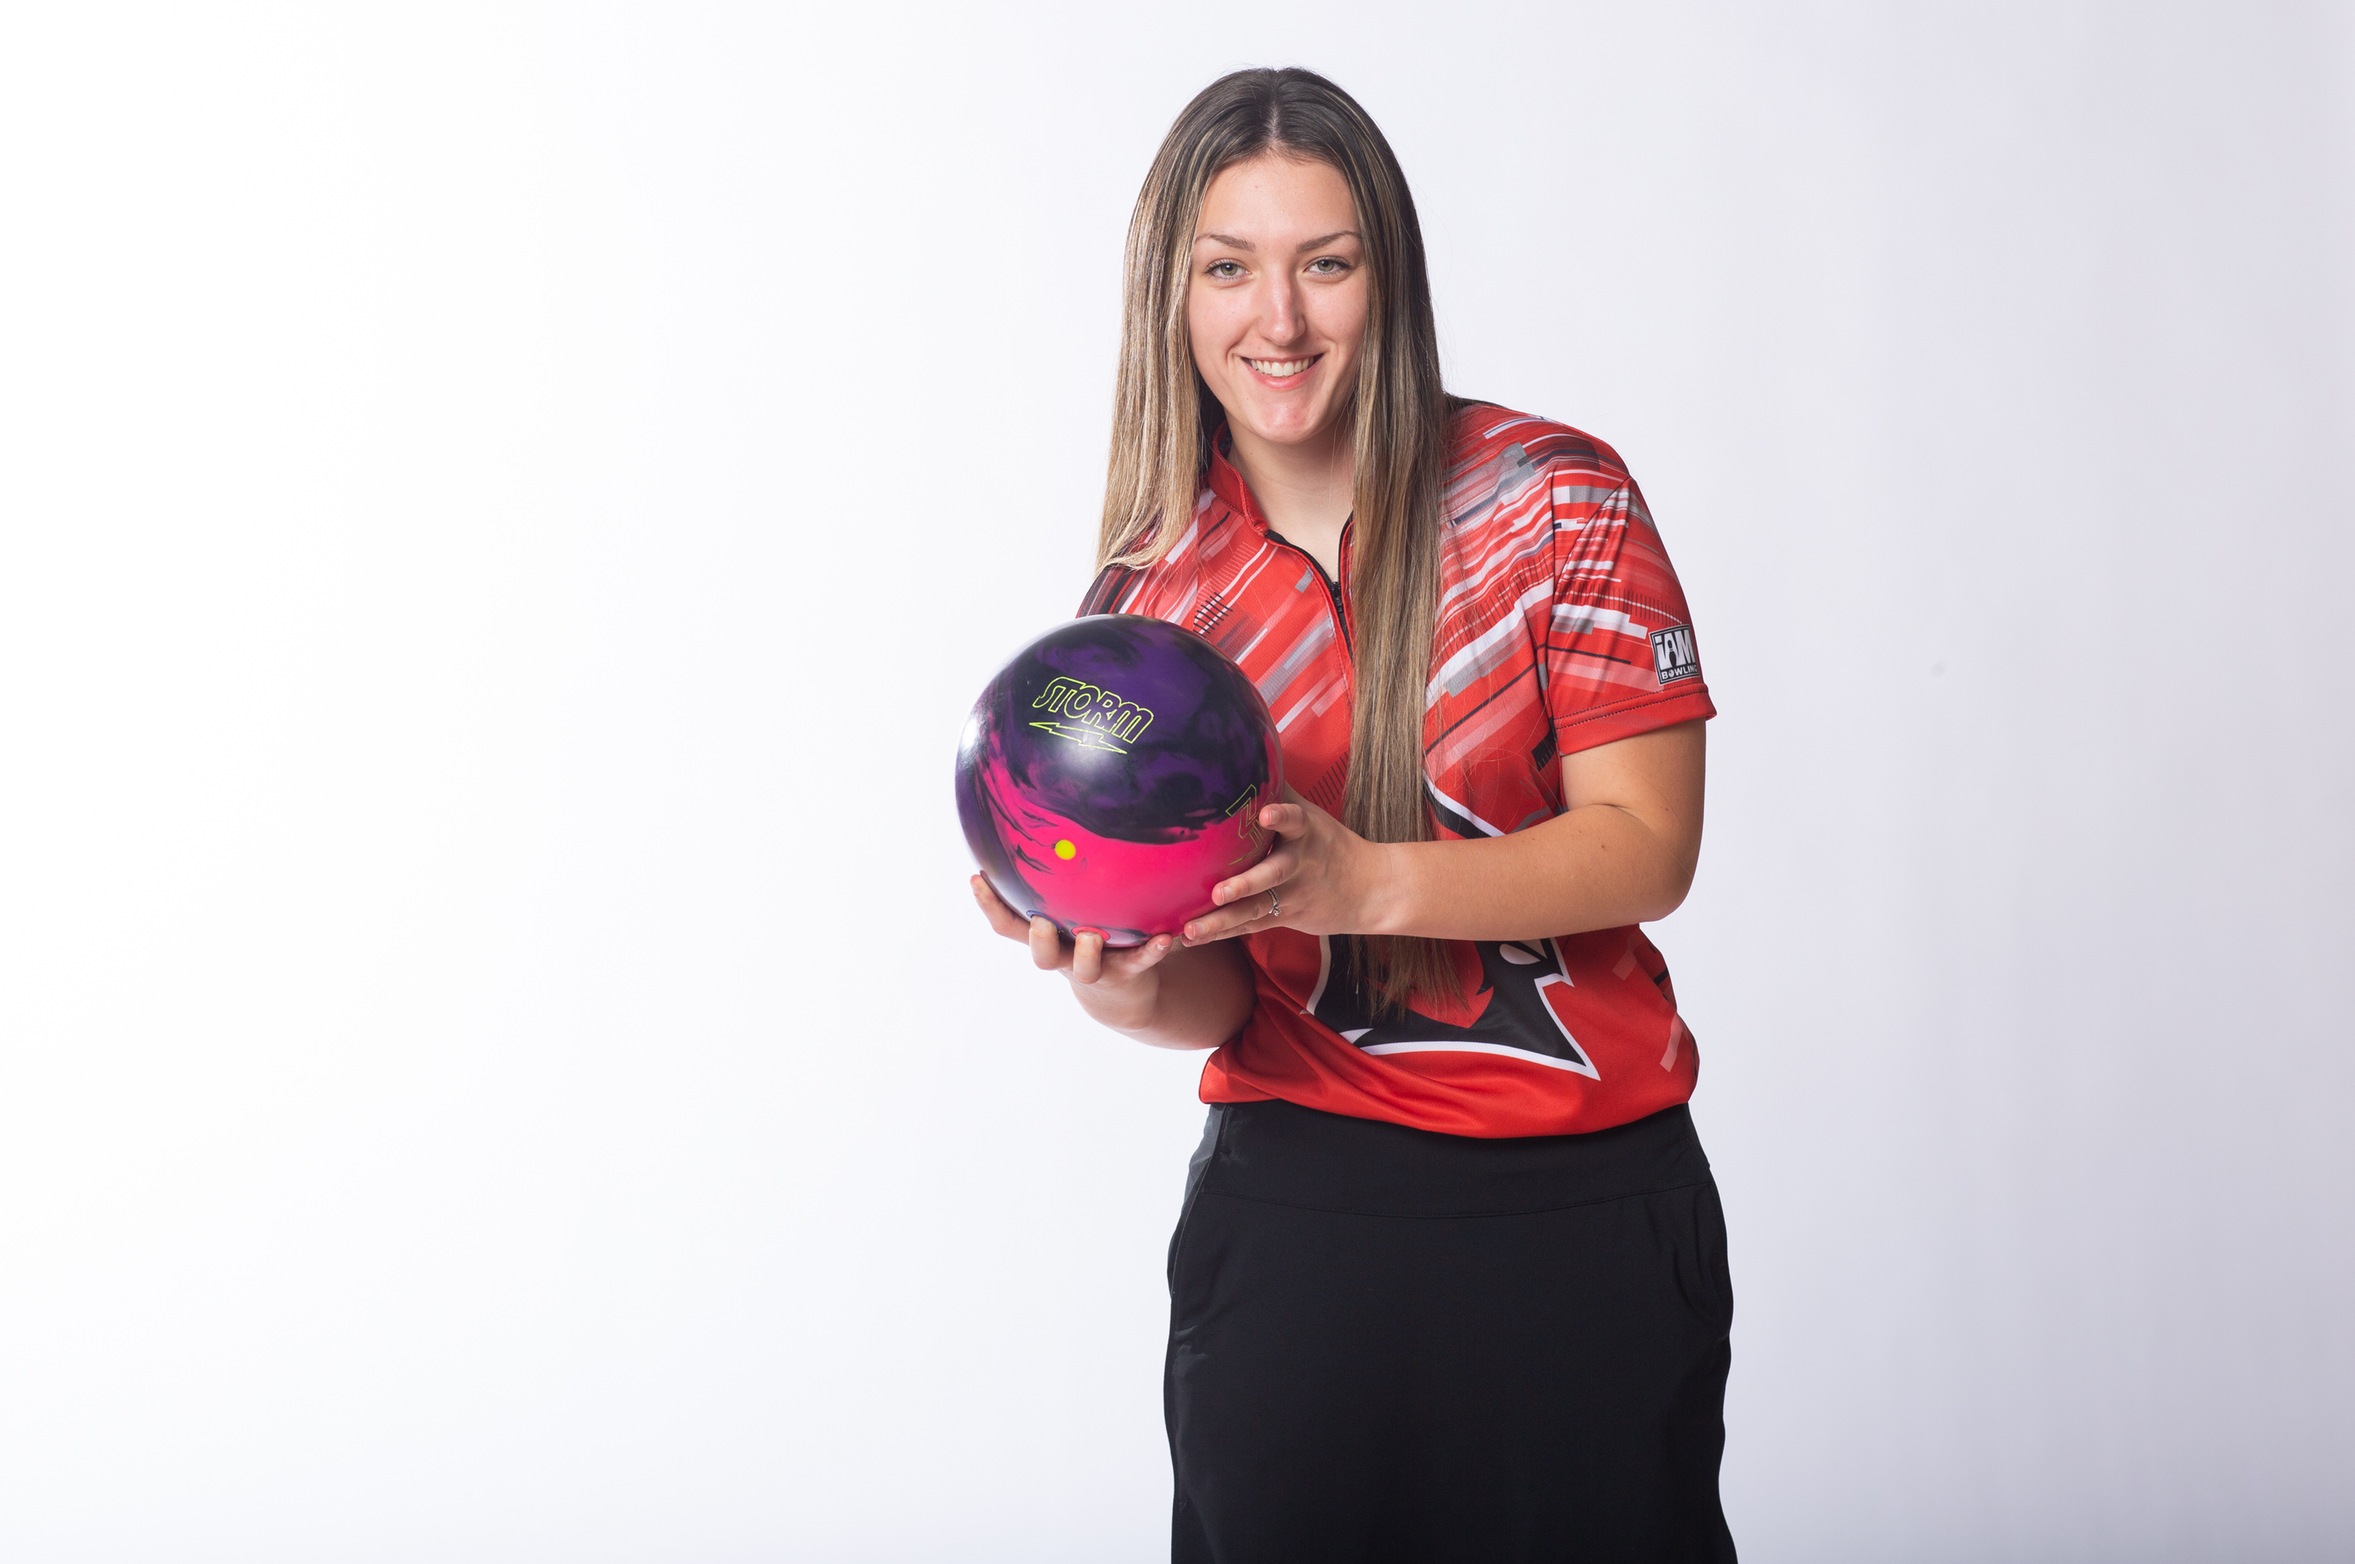 Women's Bowling see's record fall at American Heartland Classic